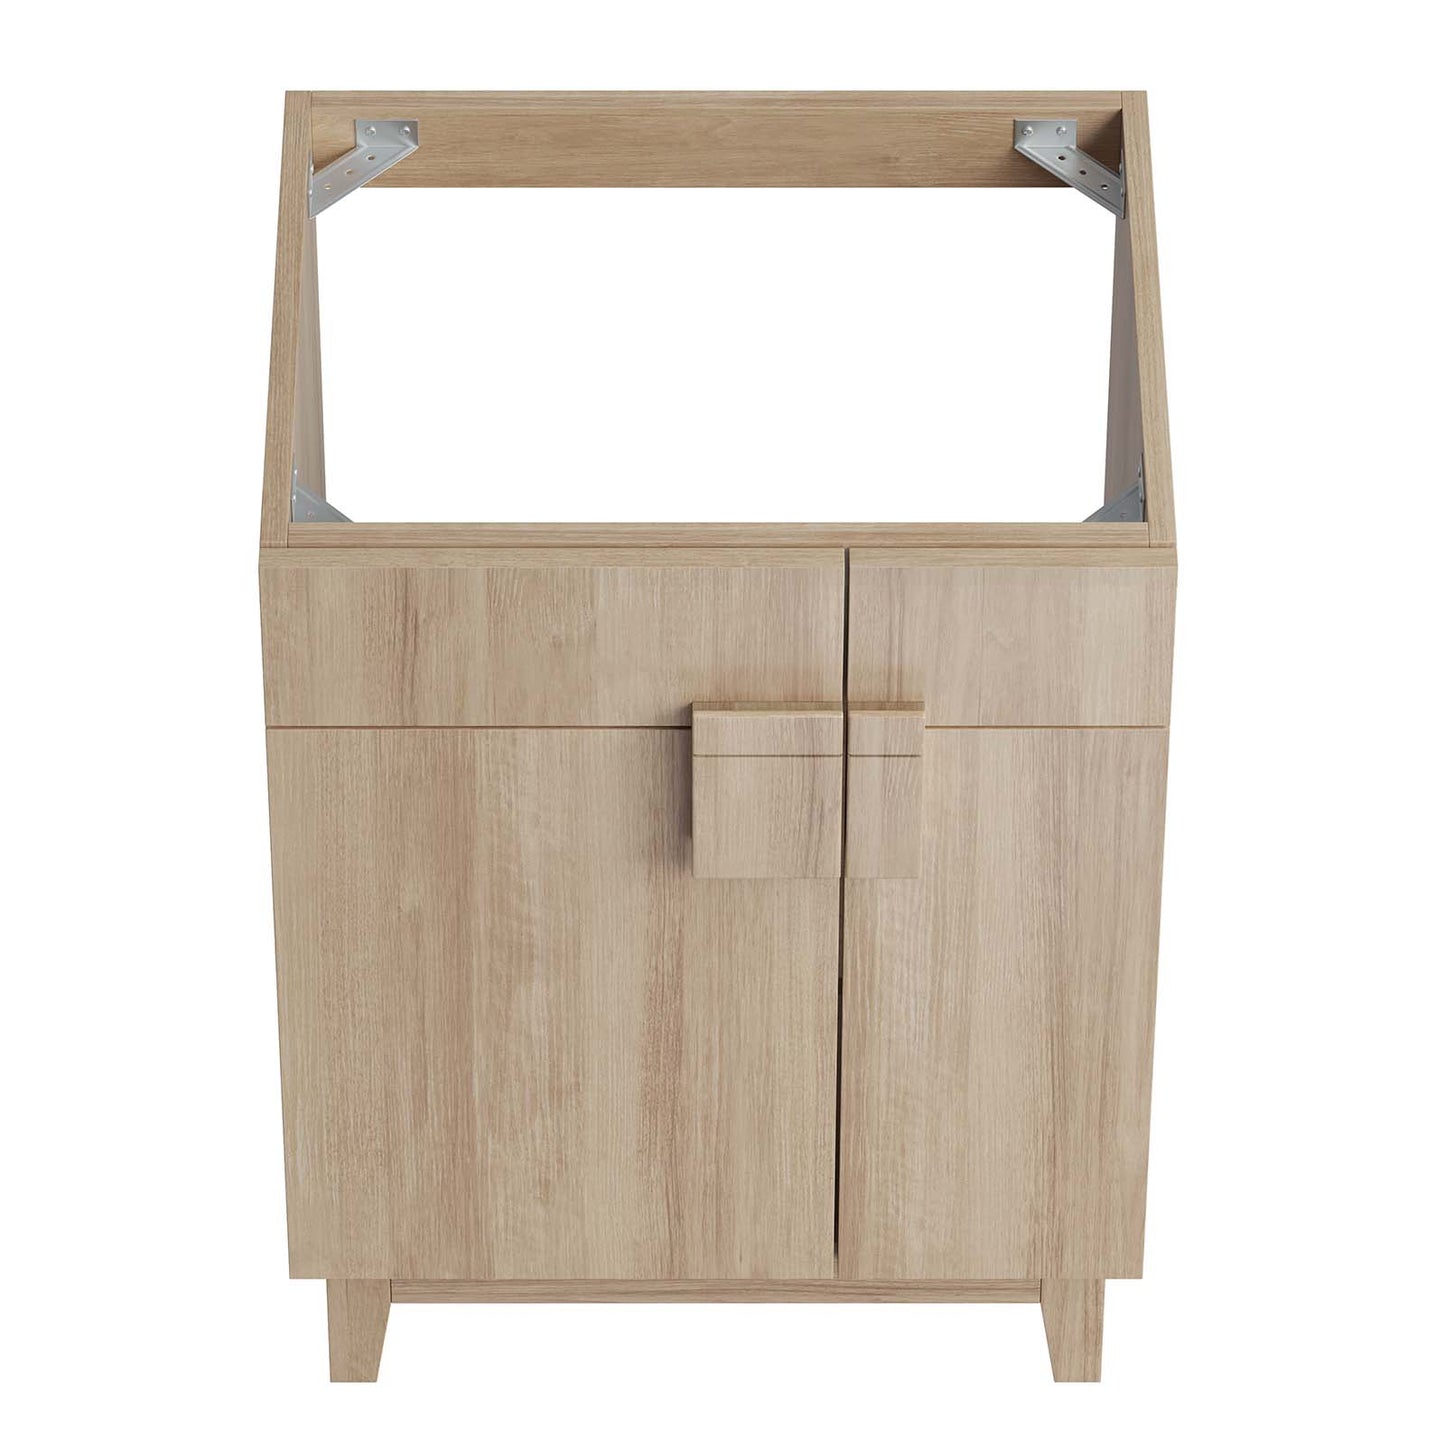 Miles 24” Bathroom Vanity Cabinet (Sink Basin Not Included) By Modway - EEI-6399 | Bathroom Accessories | Modway - 12